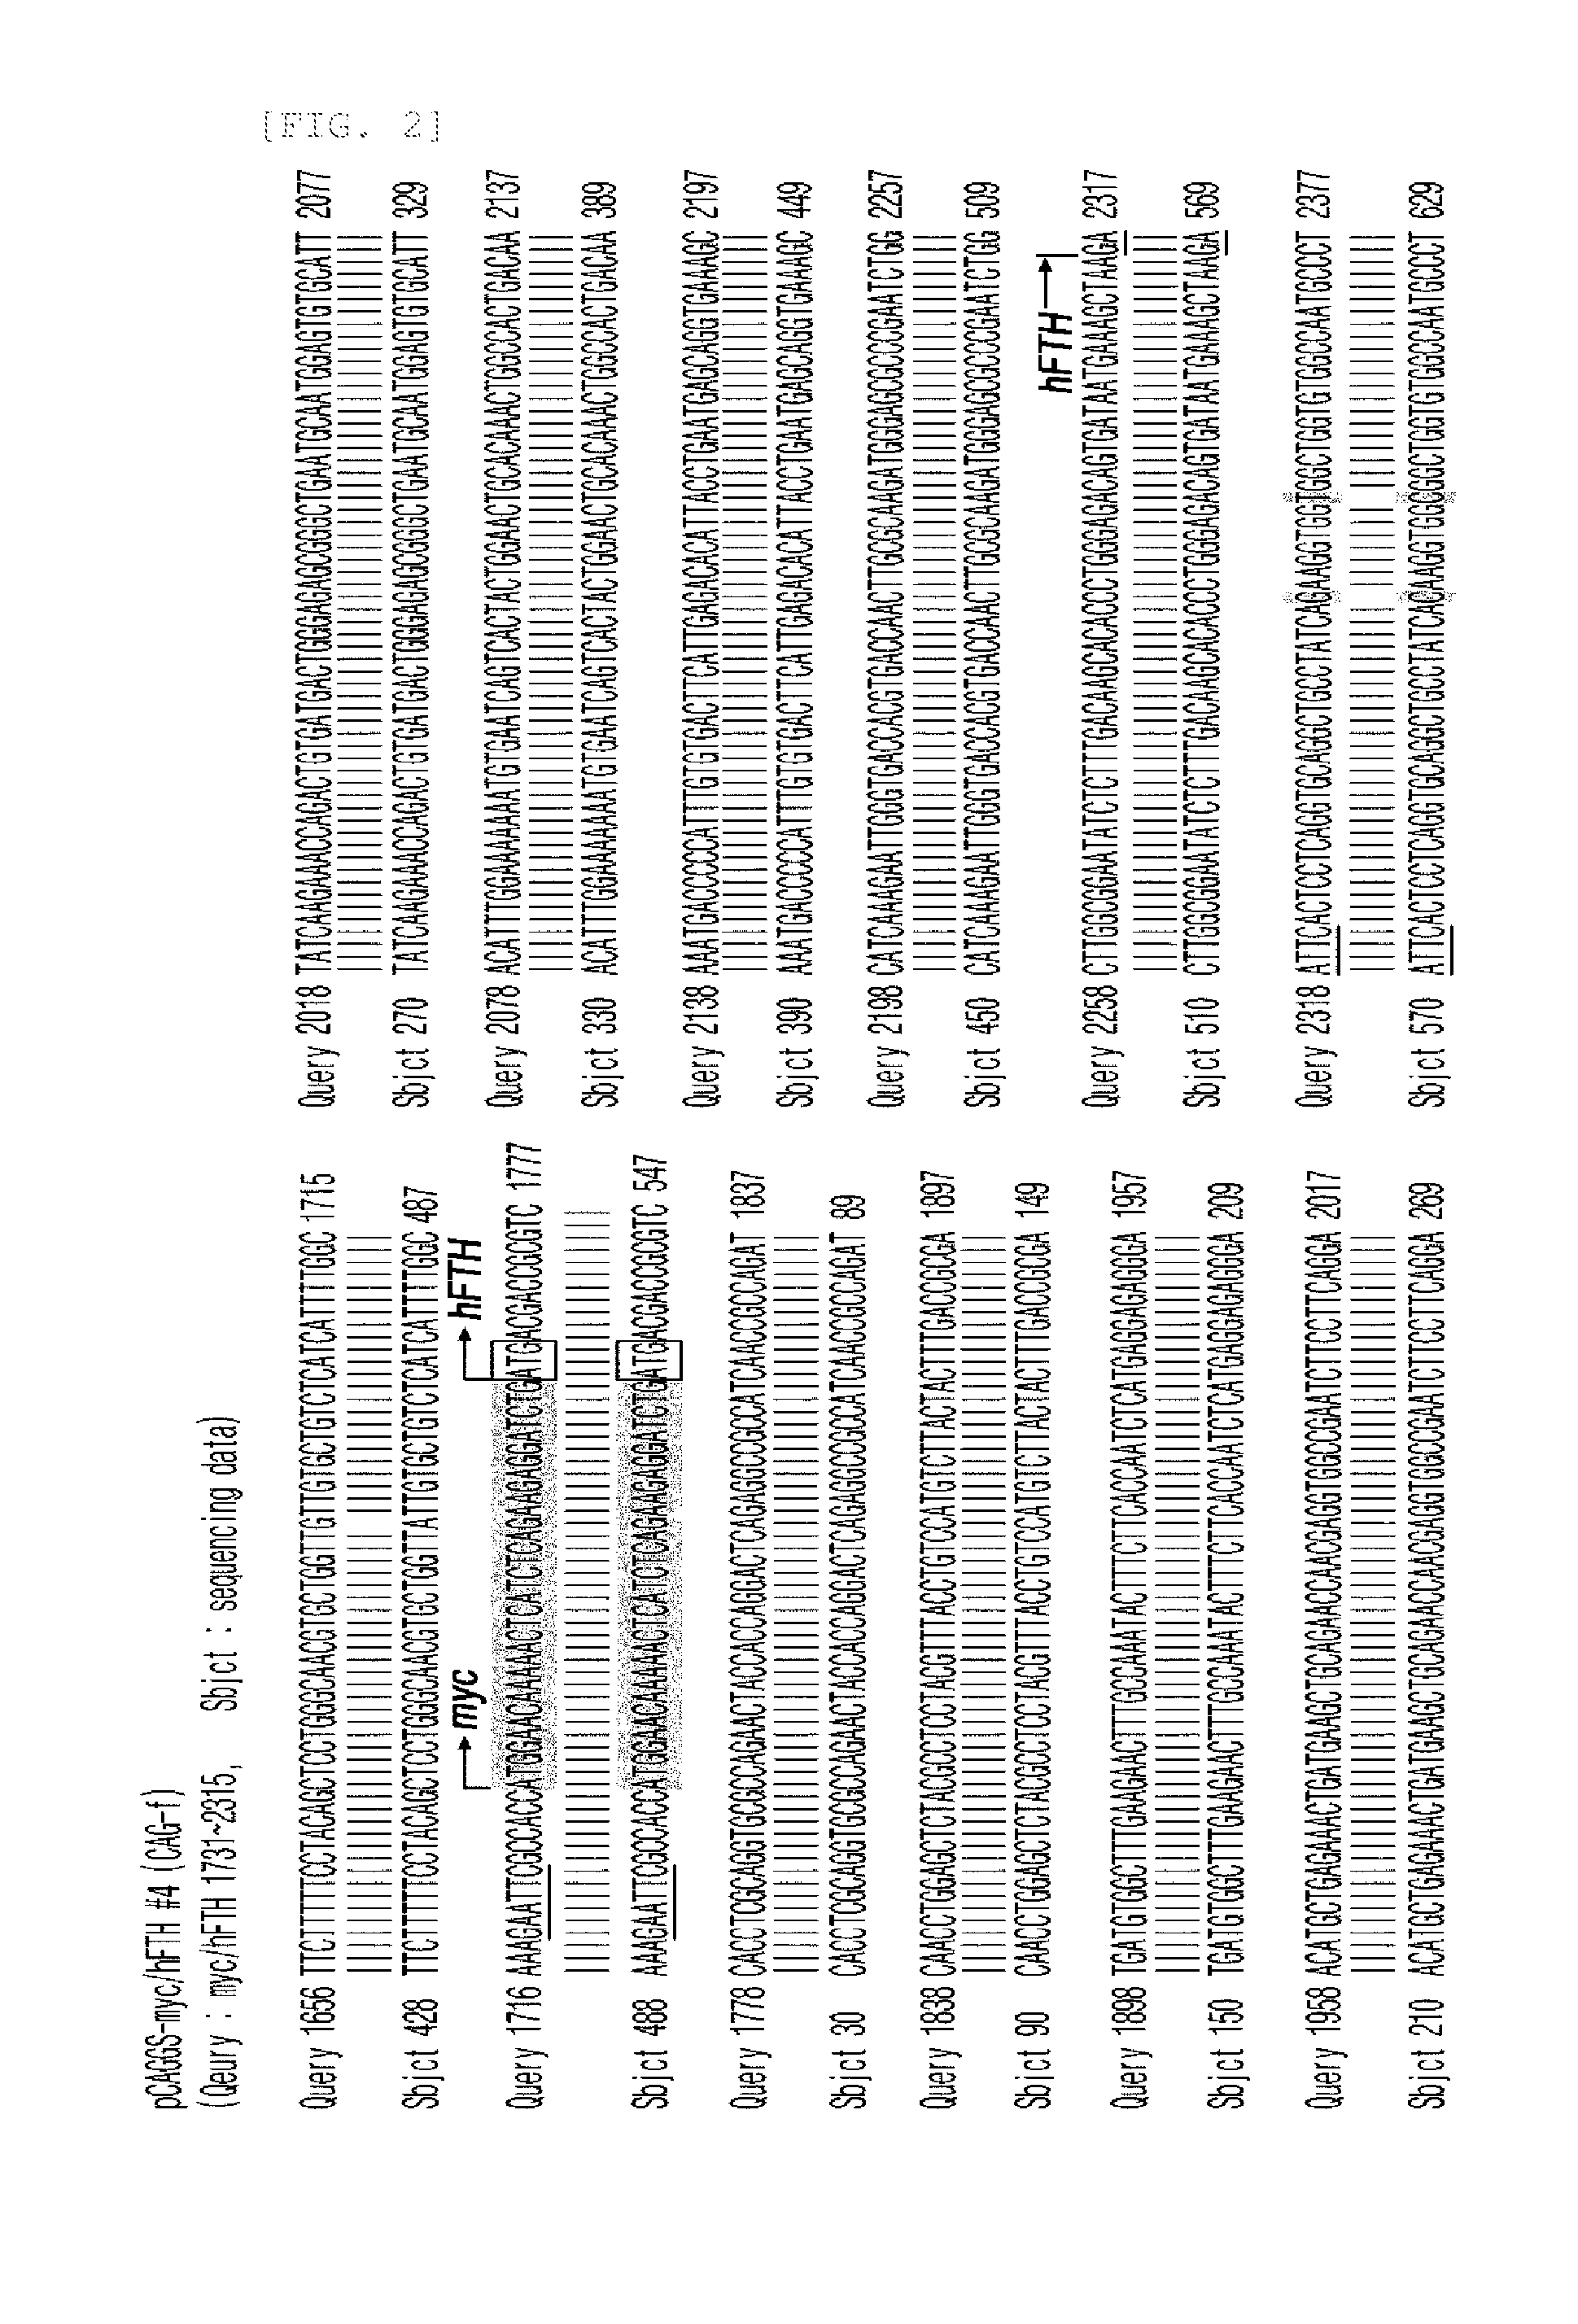 Transgenic mouse for expressing human ferritin in tissue non-specific manner and use thereof